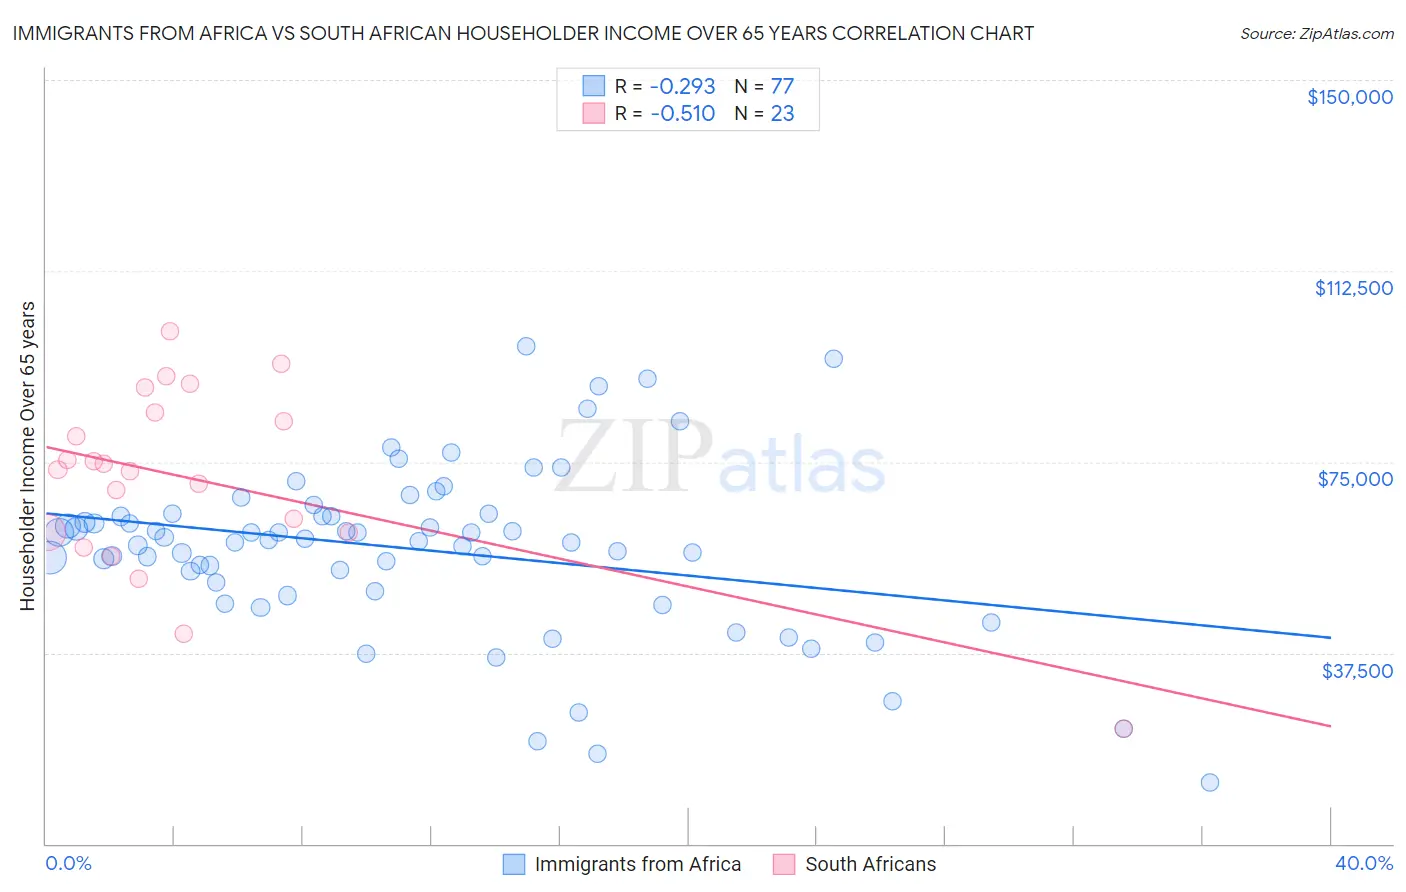 Immigrants from Africa vs South African Householder Income Over 65 years